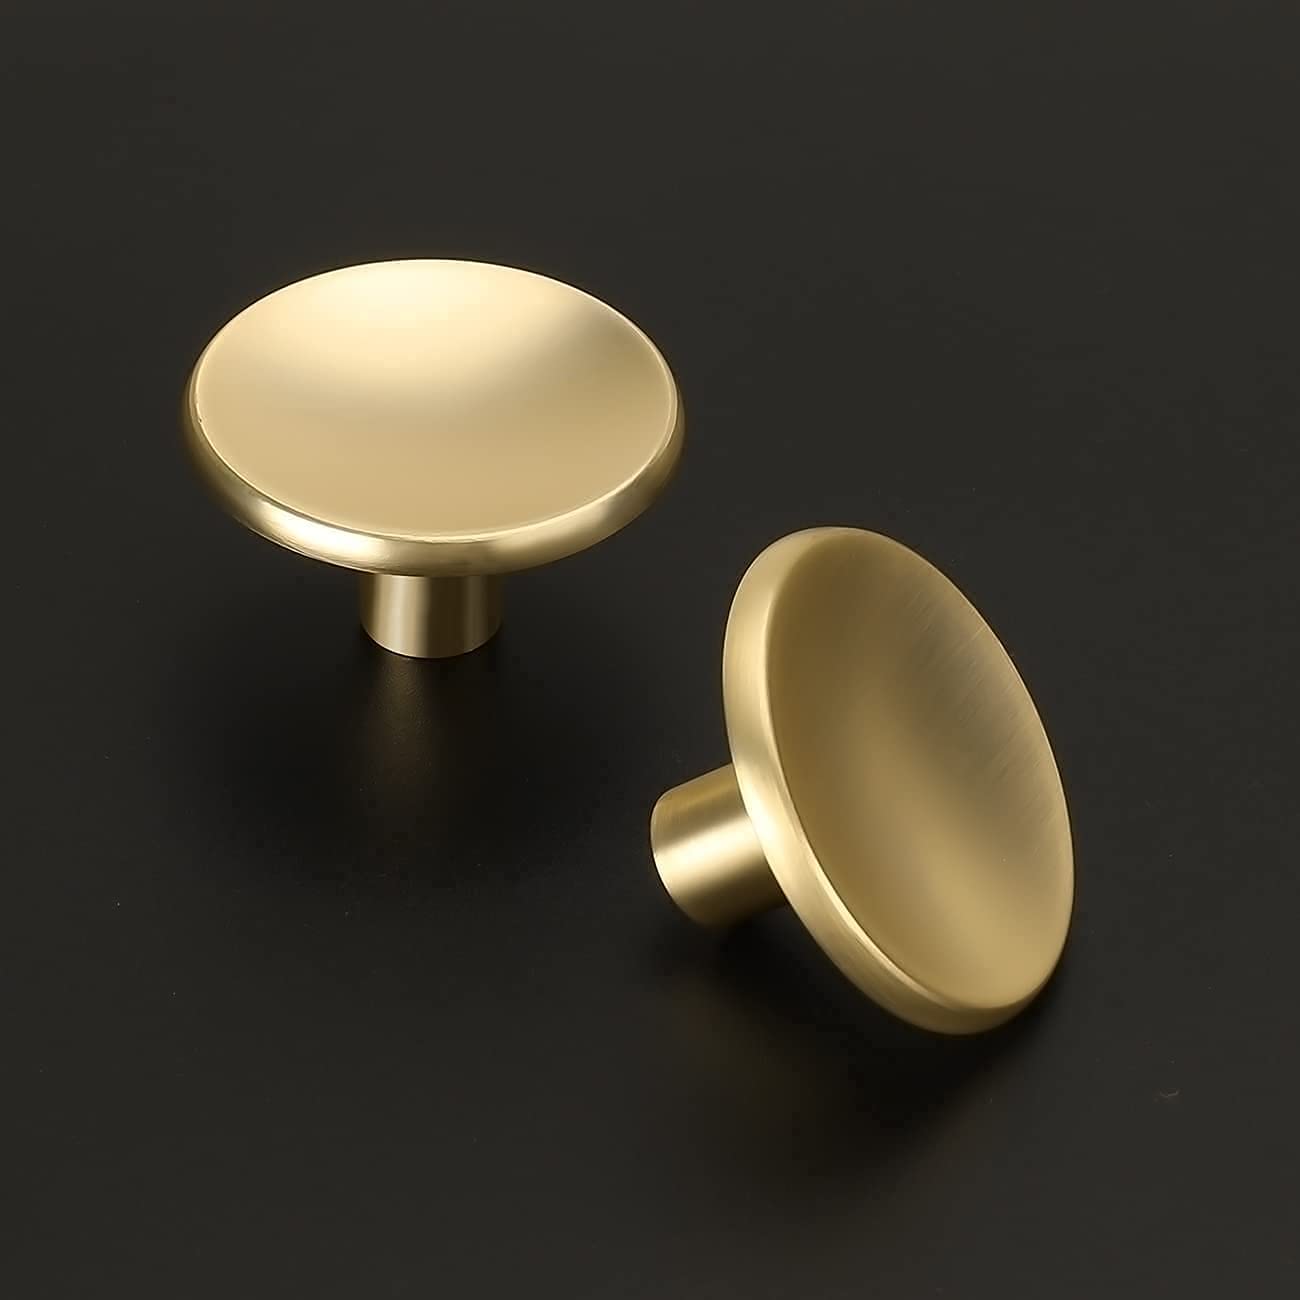 20 Pack Brass Cabinet Handles Solid Round Drawer Knobs For Kitchen Cabinets(LS4008GD) -Homdiy